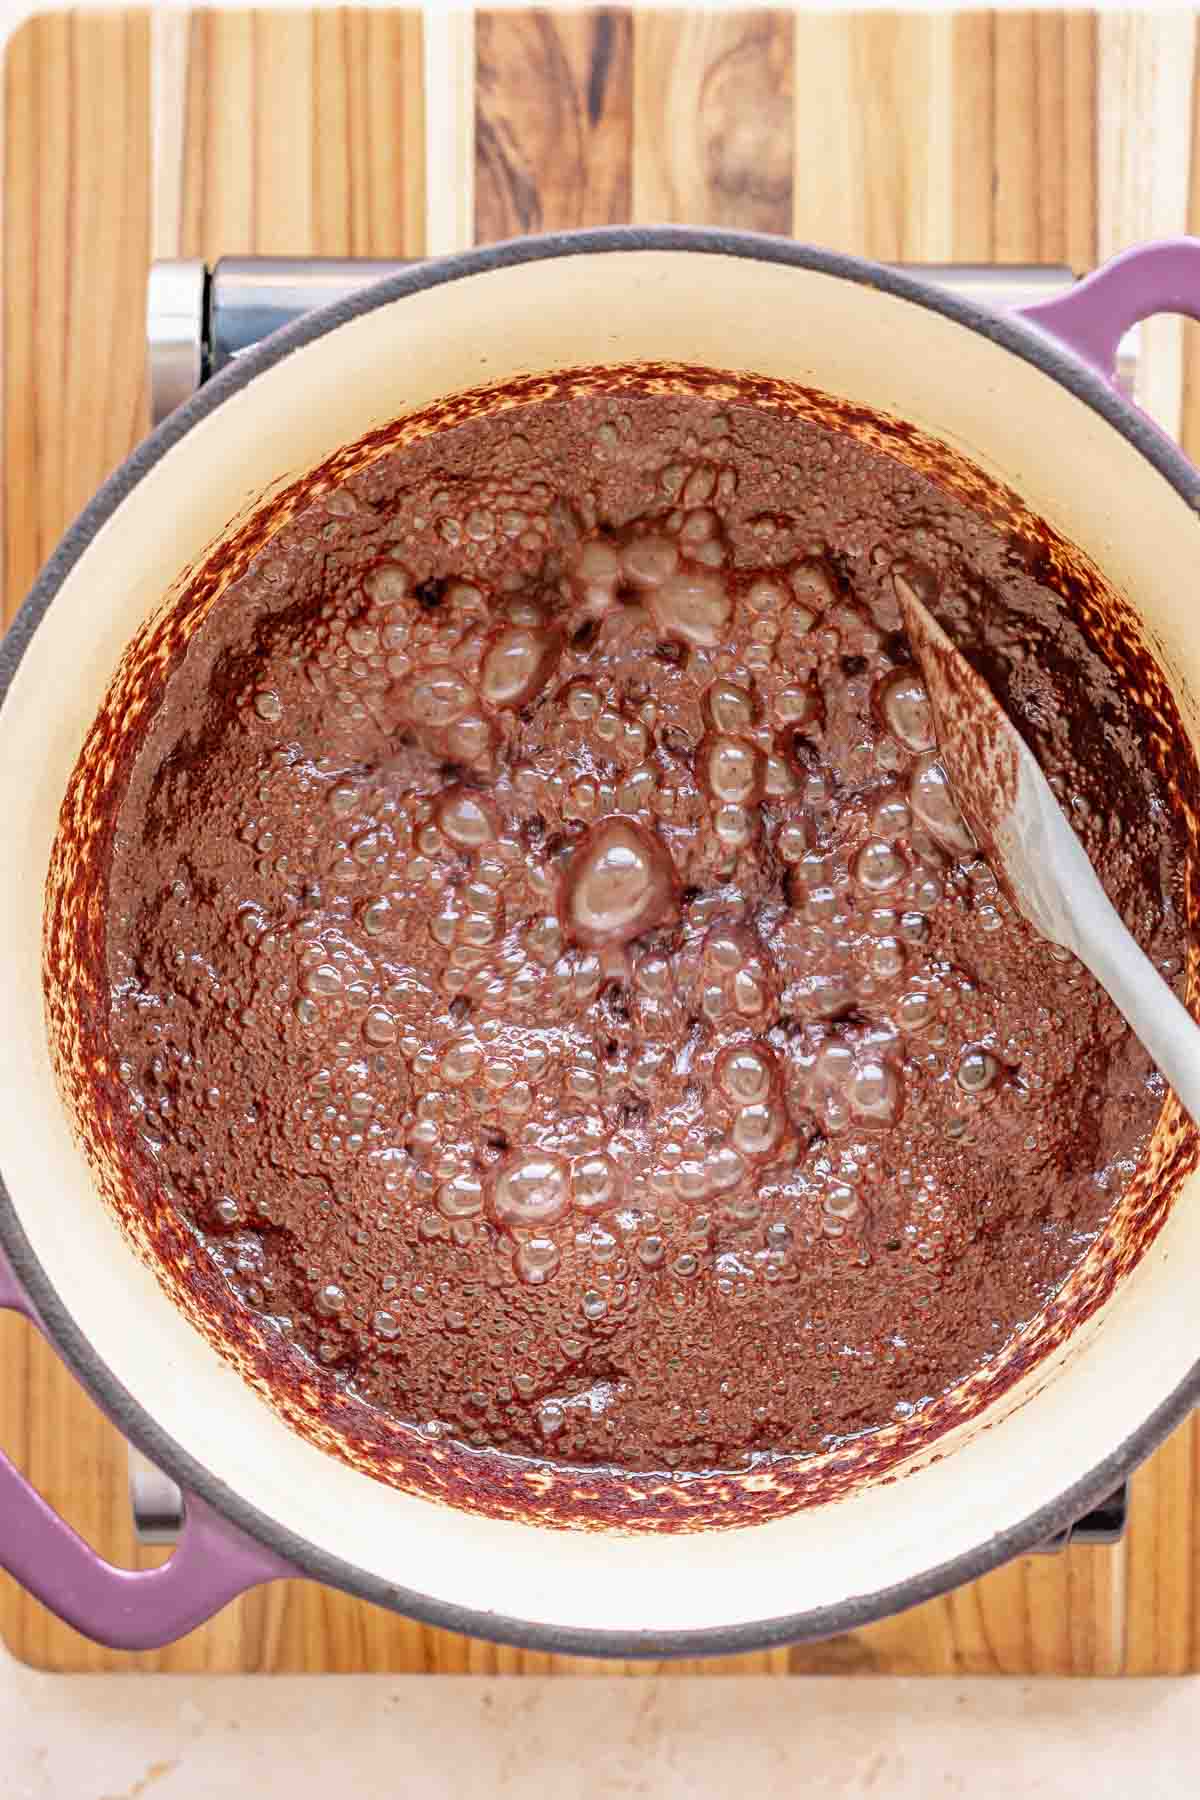 Chocolate mixture bubbling in a pot.